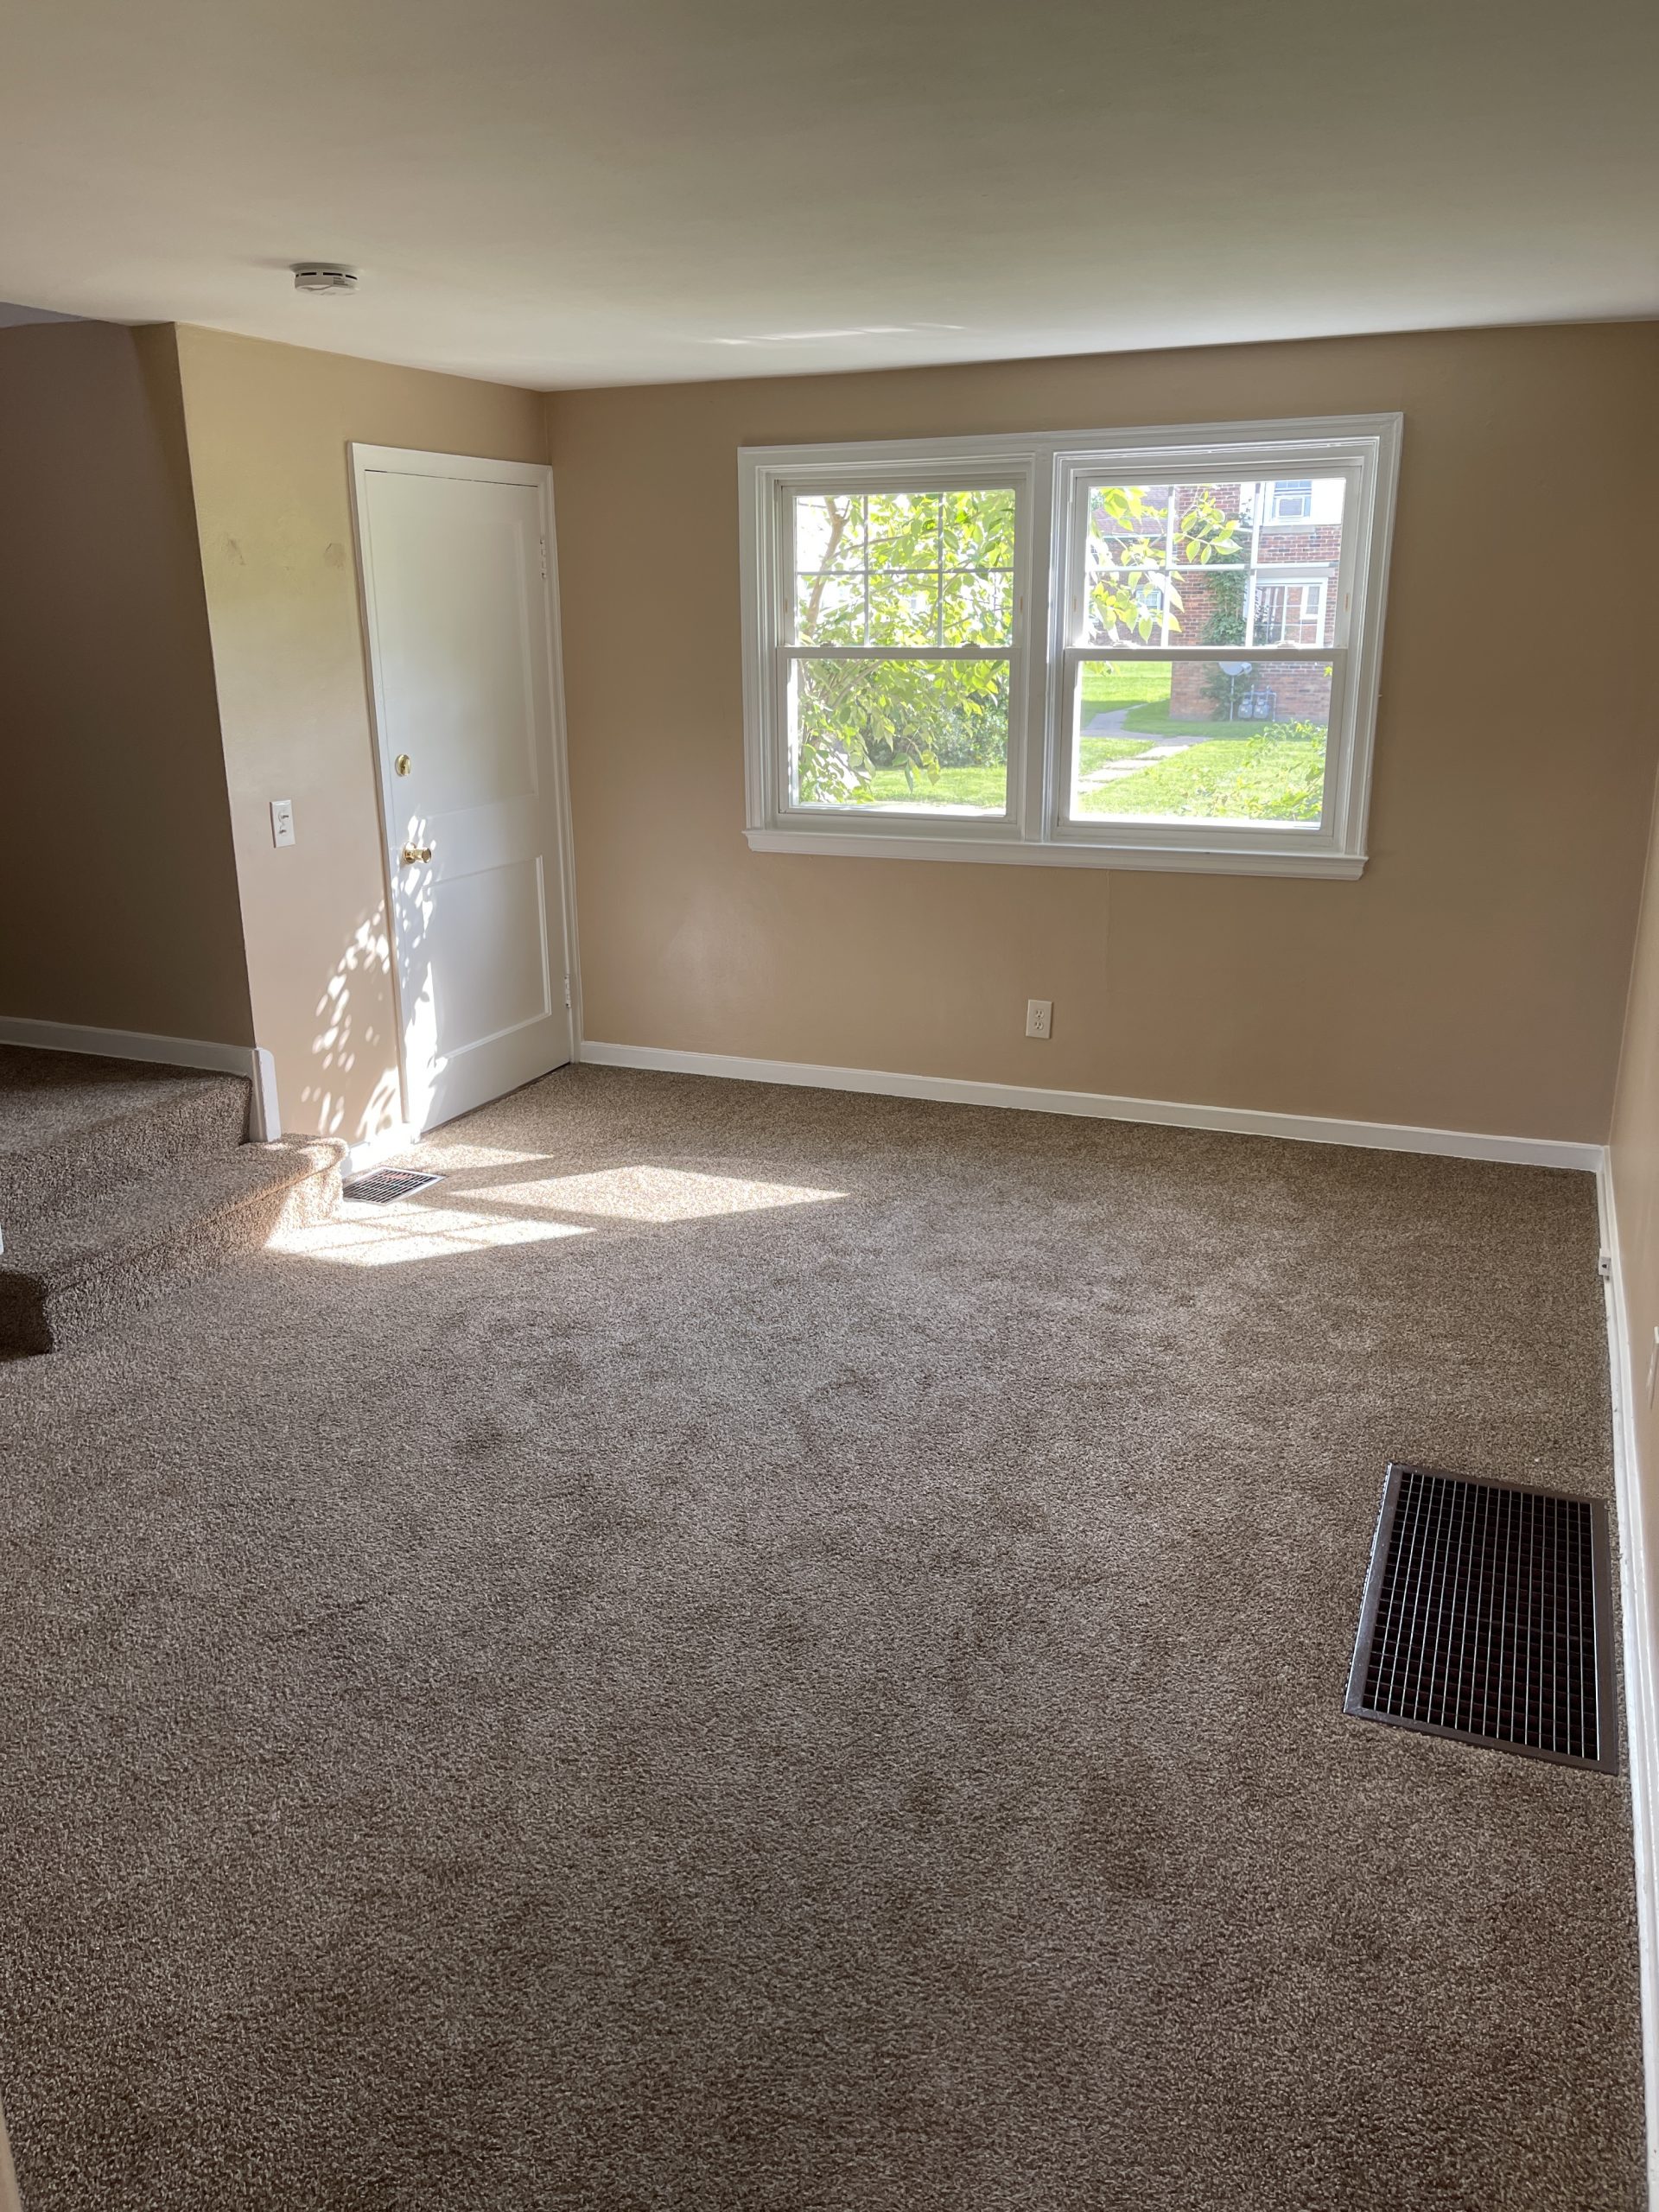 Living room inside of the townhouses for rent at Milpine Garden community.